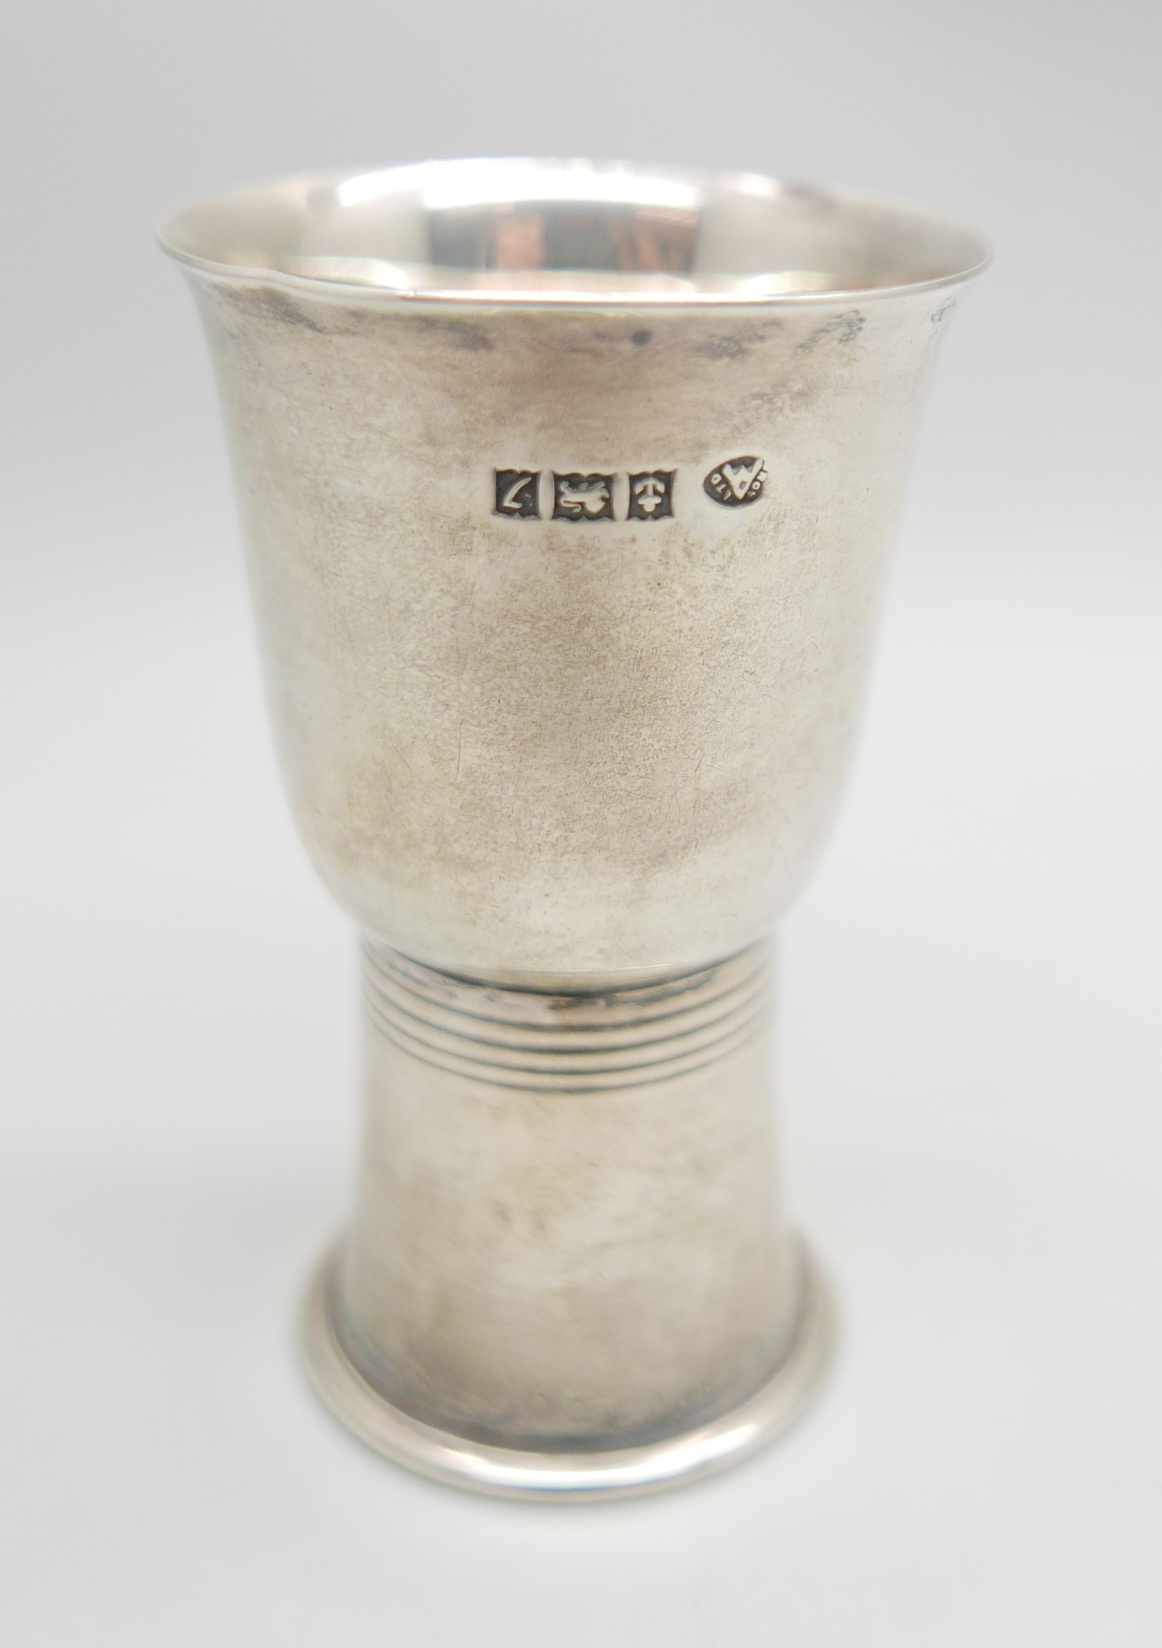 A silver double ended shot measure, Adie Brothers Ltd., Birmingham 1958, 49.1g, 8cm